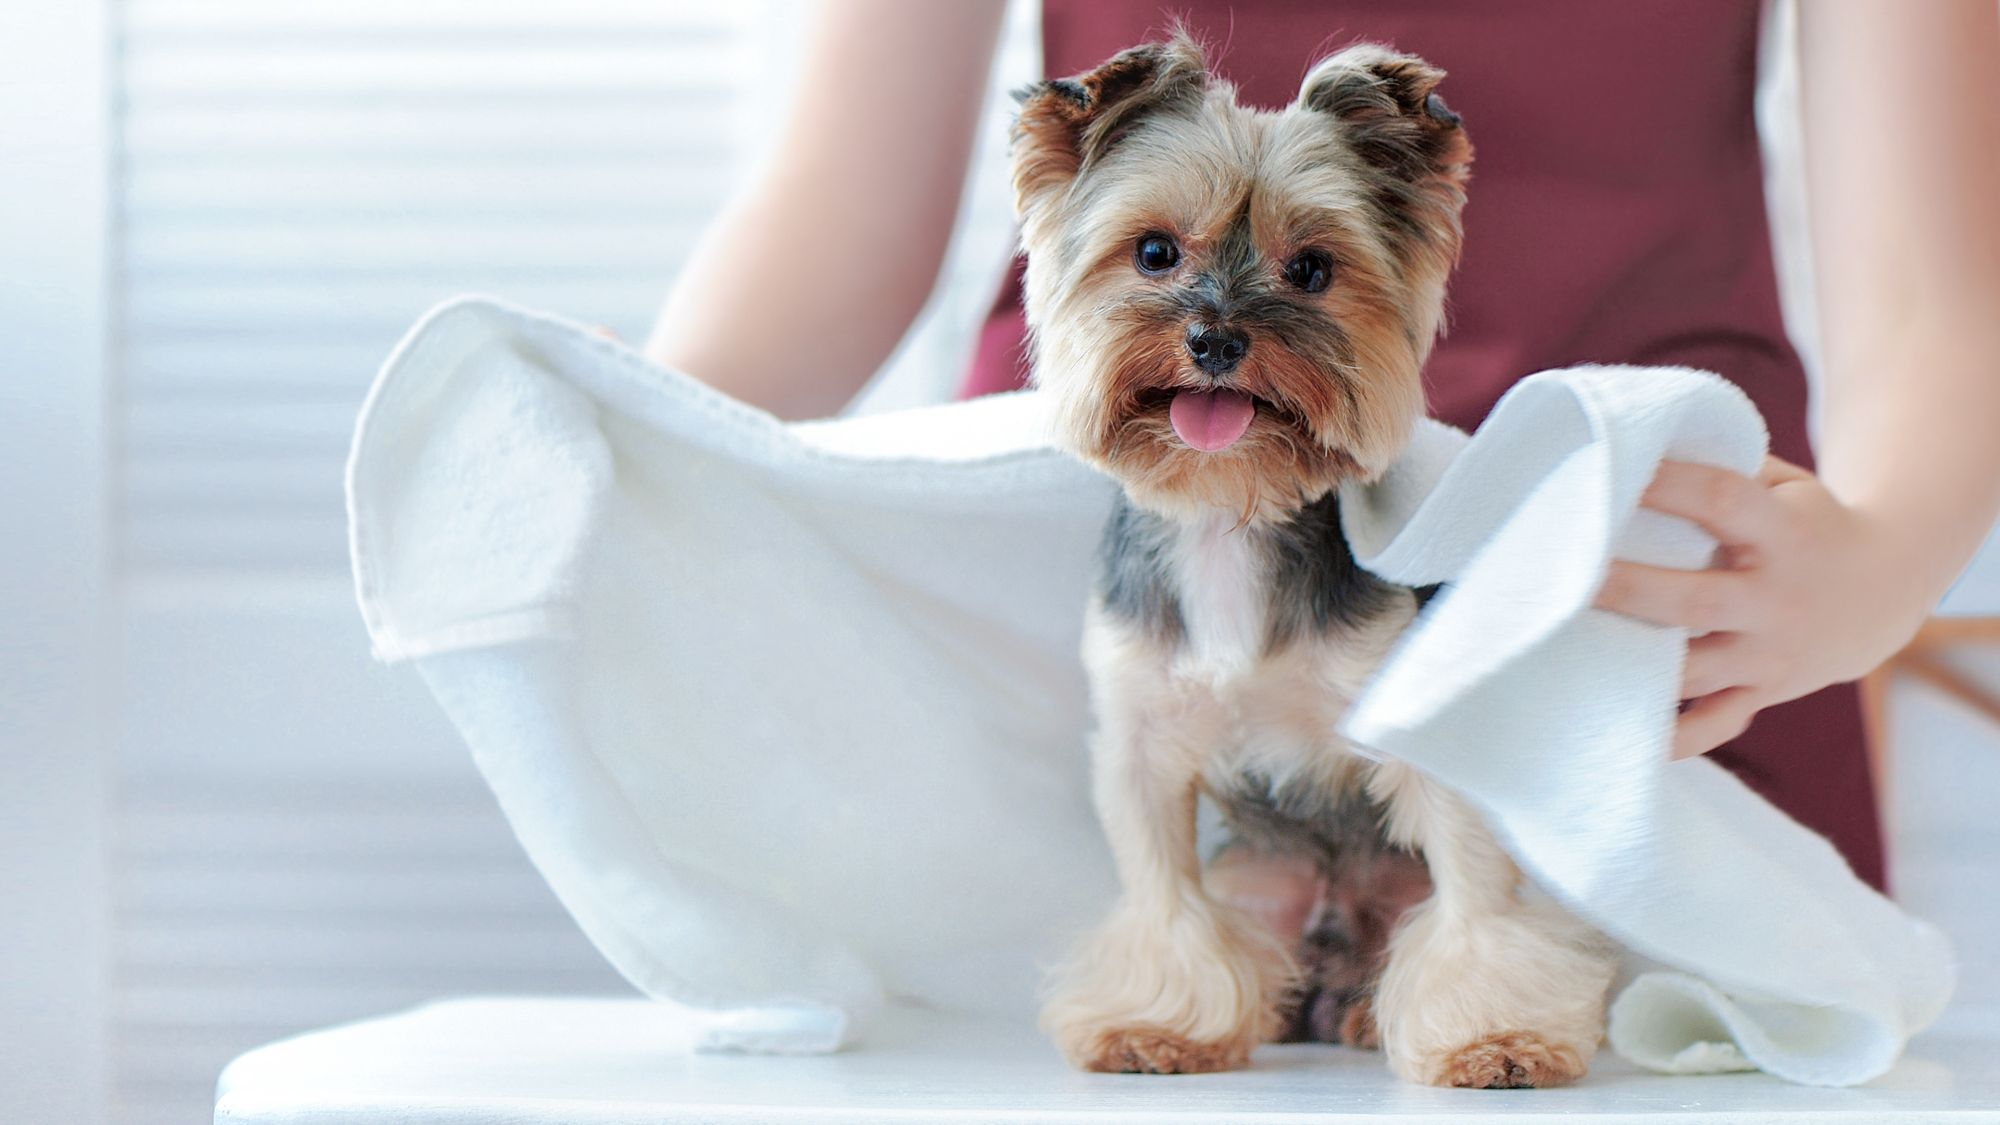 Yorkshire Terrier being dried with a towel